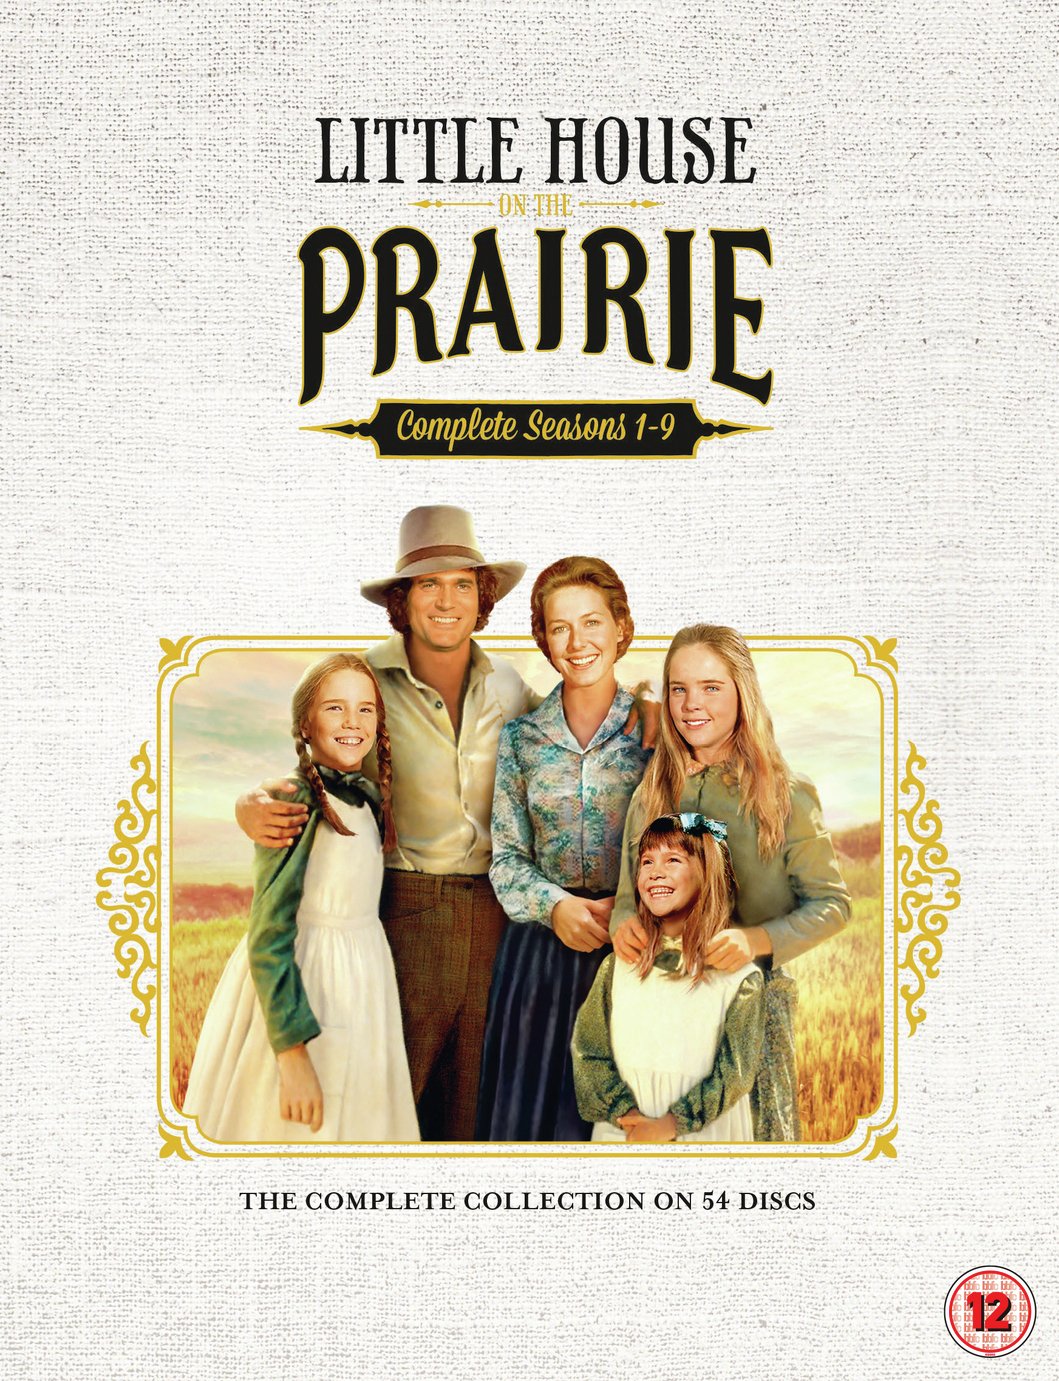 Little House on the Prairie DVD Box Set Review